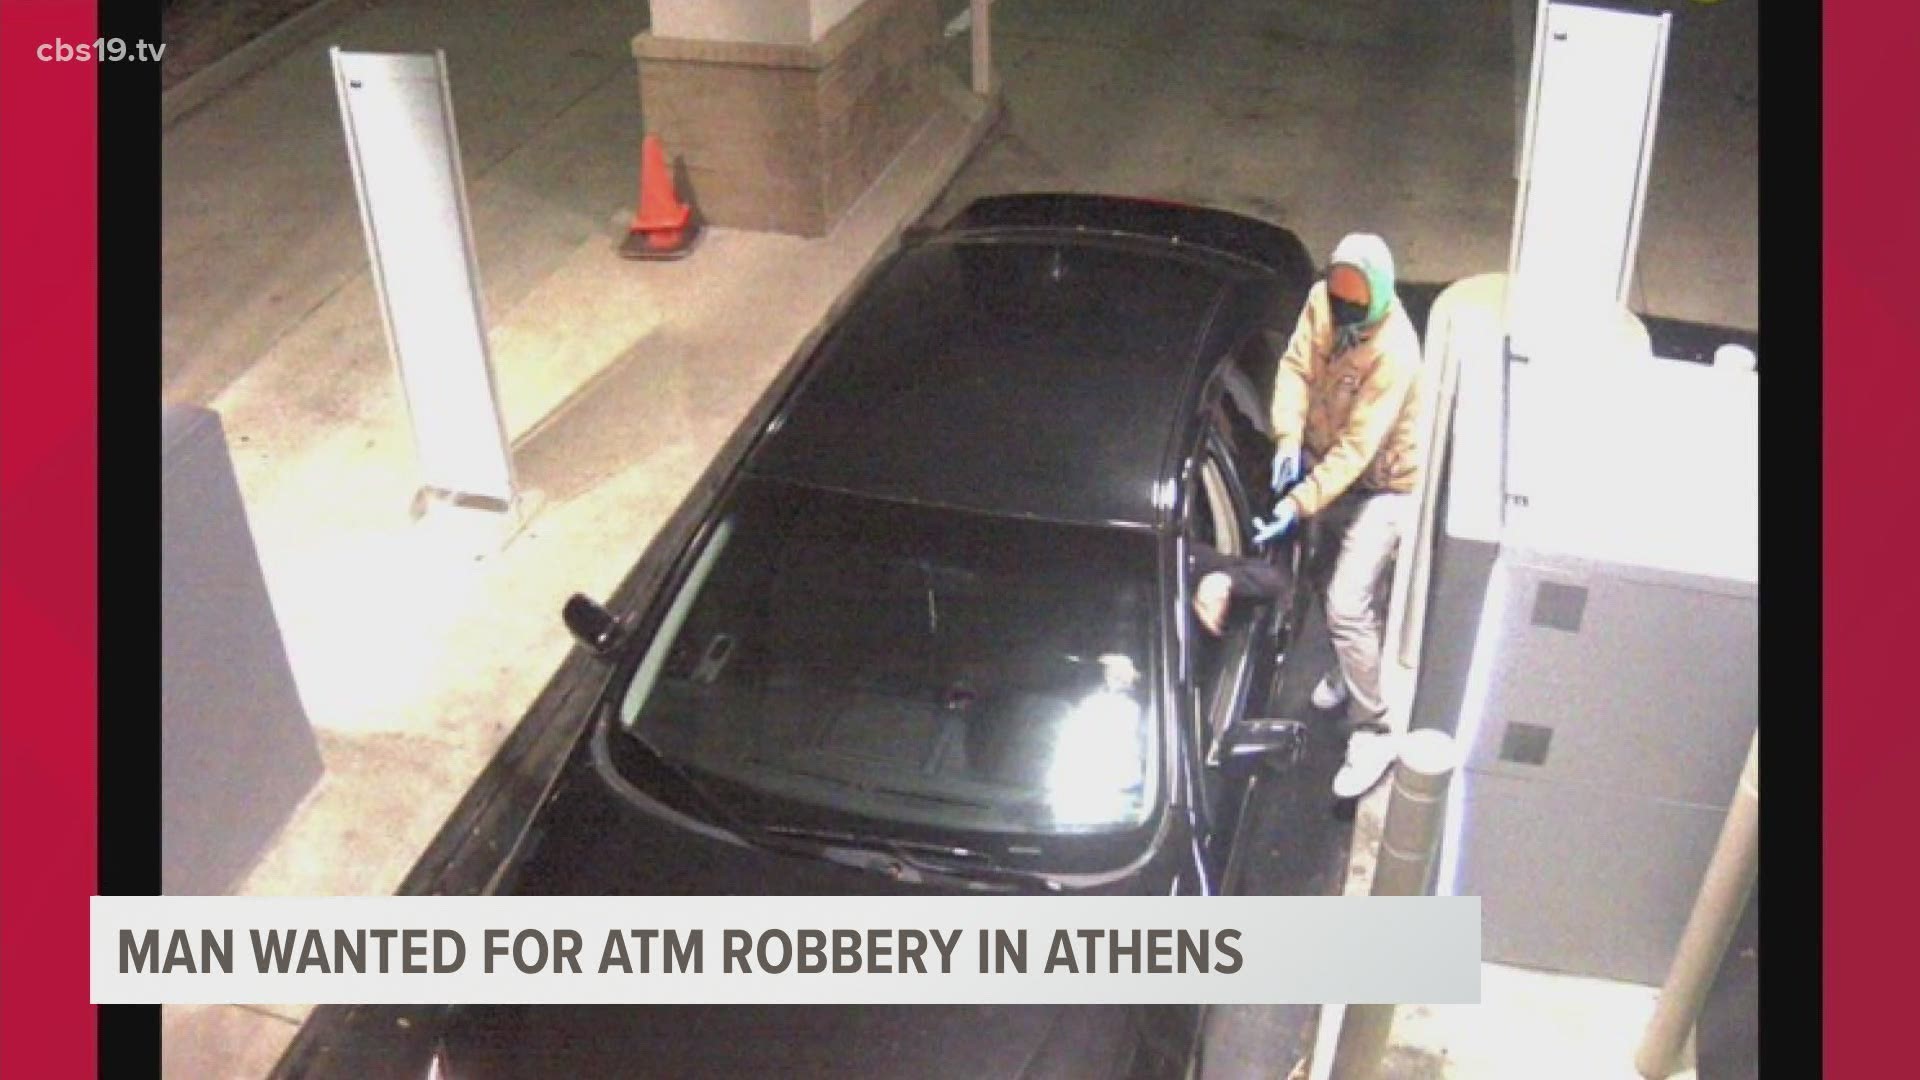 The robbery happened at the Vera Bank ATM located in the 700 Block of East Tyler Street.